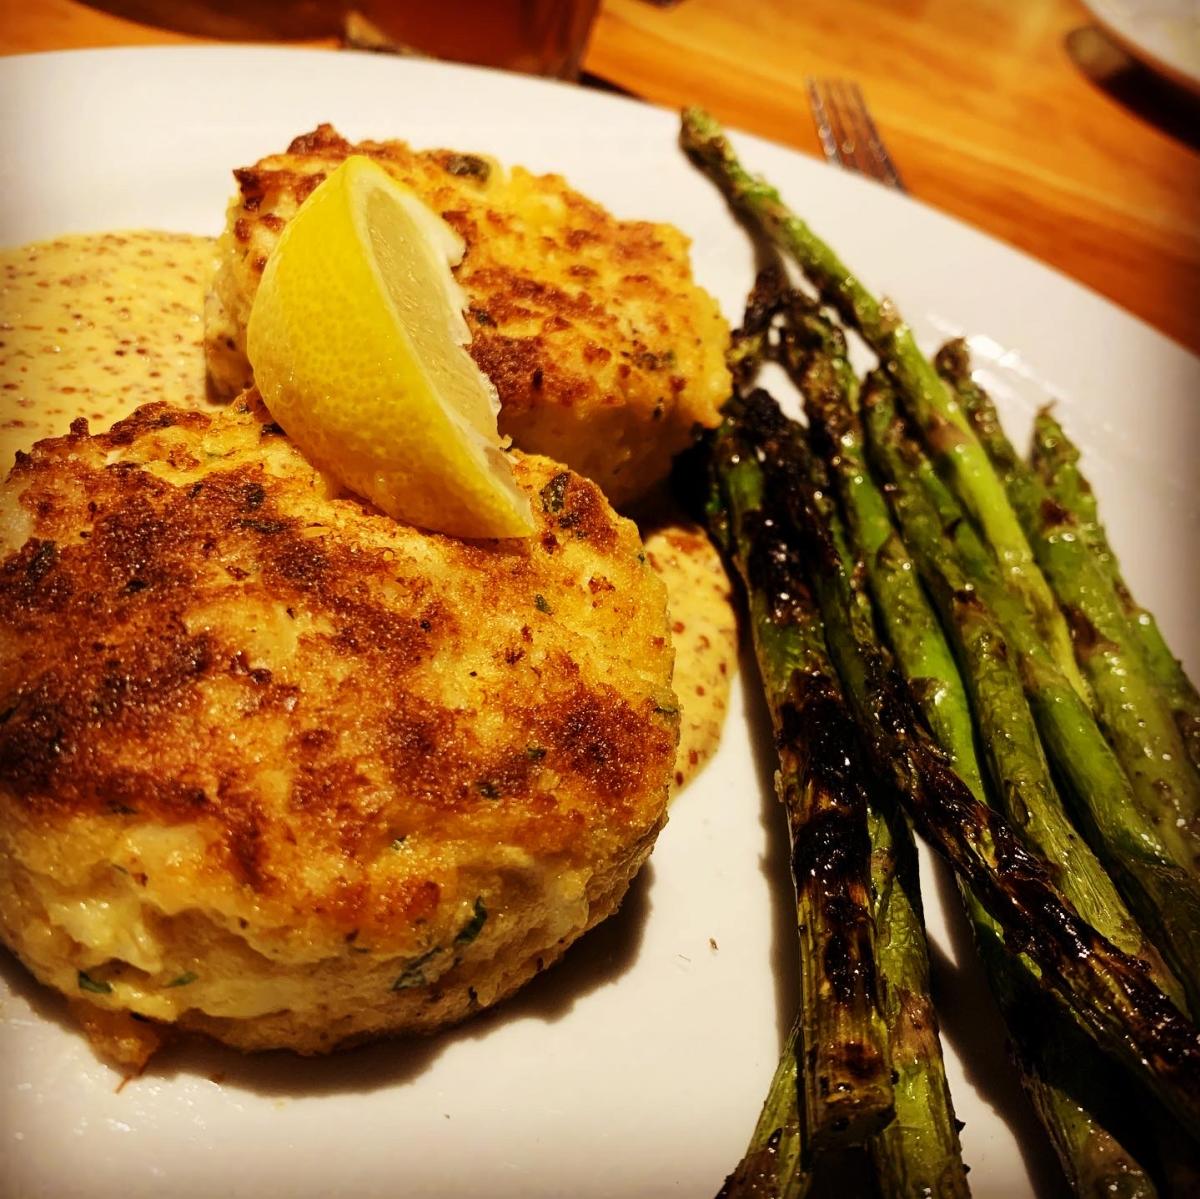 Crab Cakes from Black Canyon